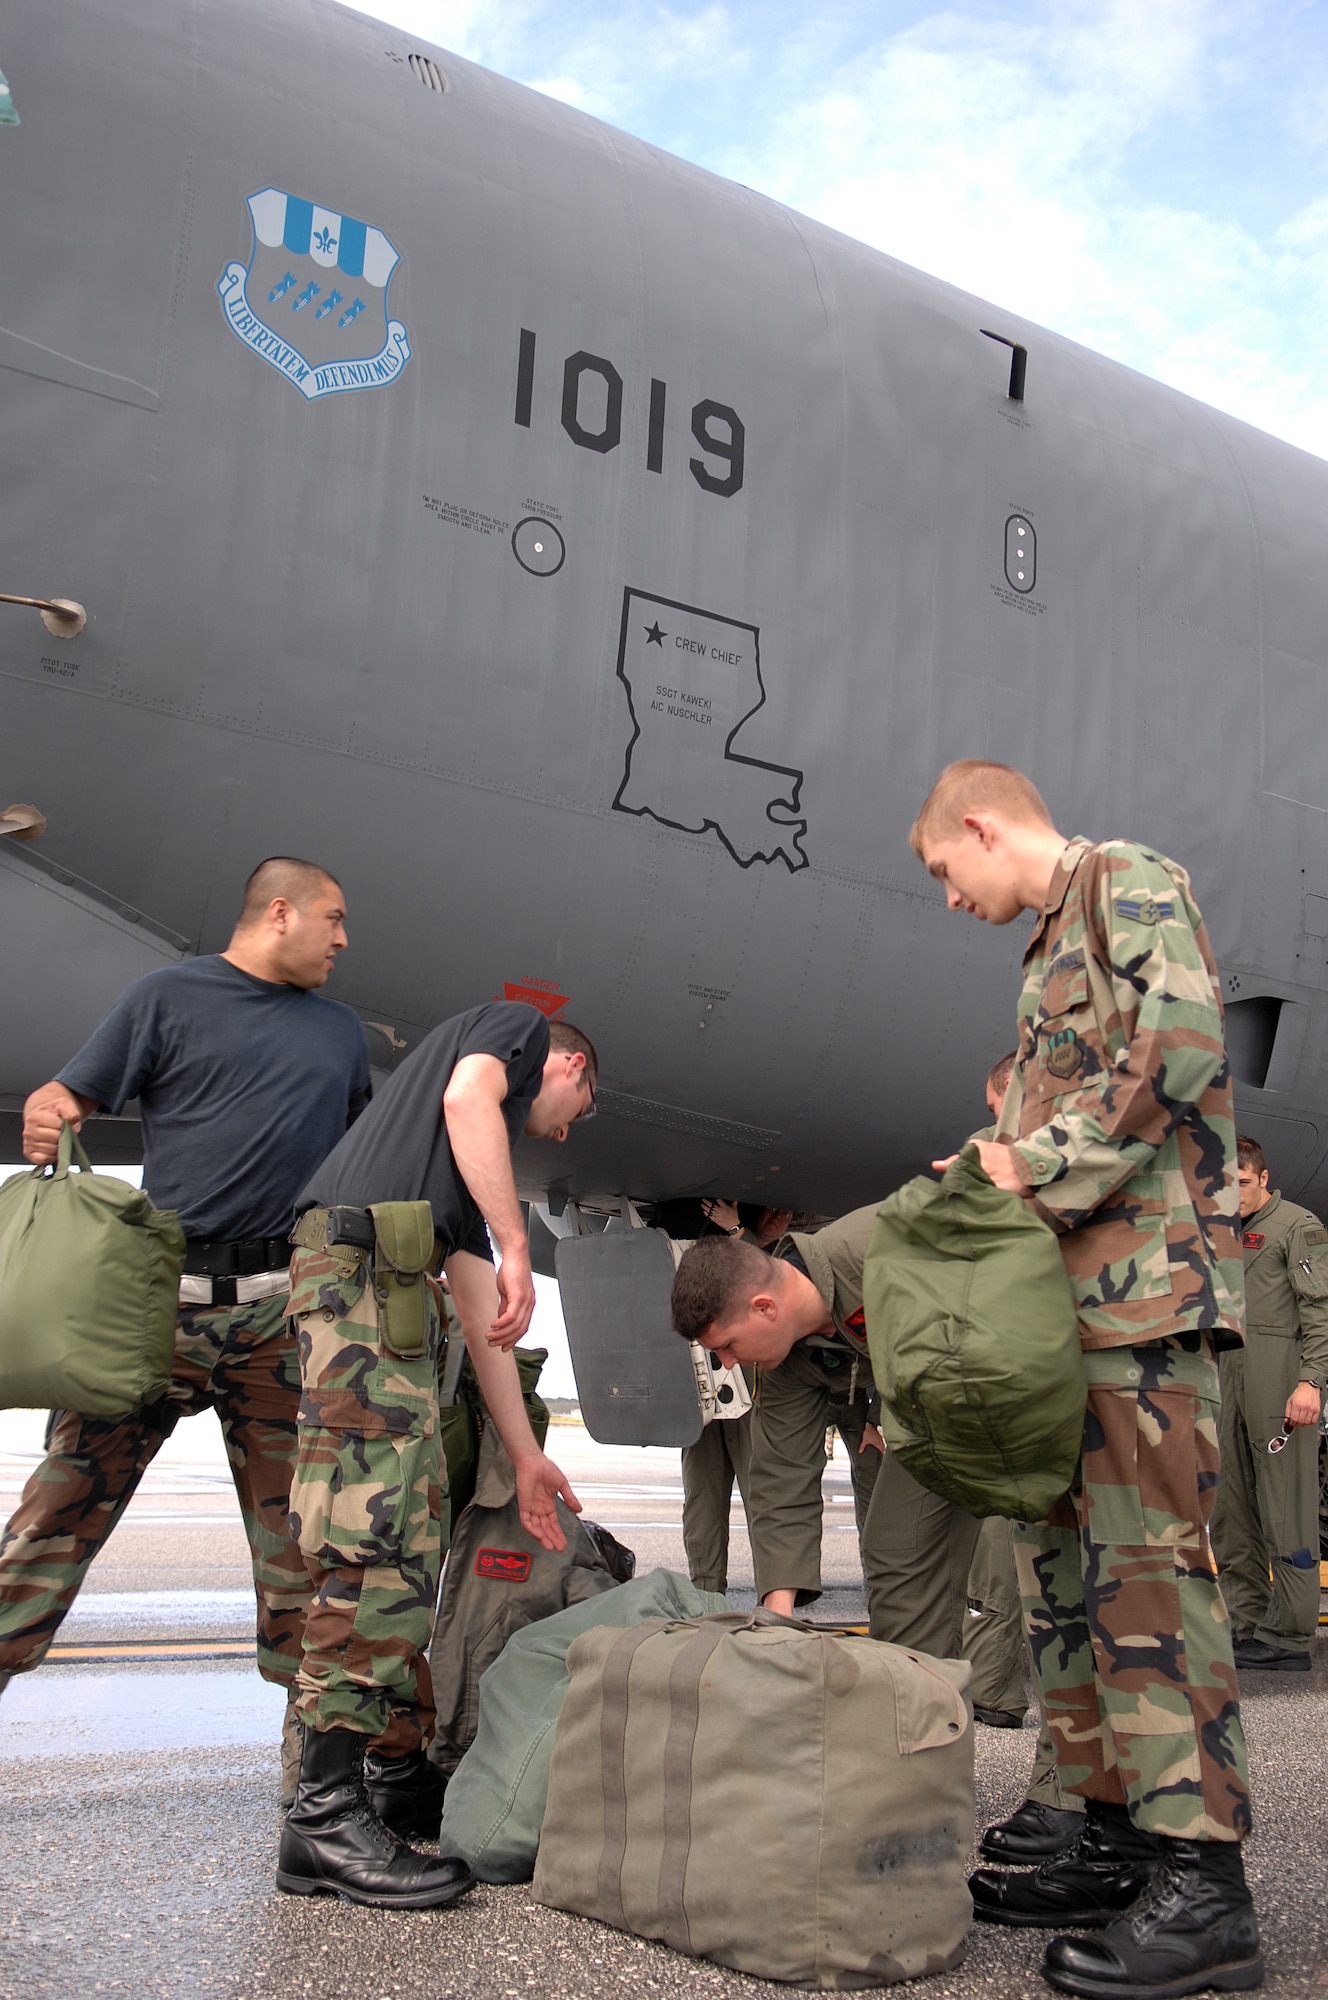 Andersen AFB, Guam -- Airmen help unload a B-52 Stratofortress bomber  from the 96th Expeditionary Bomb Squadron after arriving on Andersen AFB. The rotating bomber units promote security and stability in the region as well as provide unique aircrew training opportunities. The 96th EBS is deployed here from Barksdale AFB, La.
(U.S. Air Force Photo By Staff Sgt. Vanessa Valentine) 